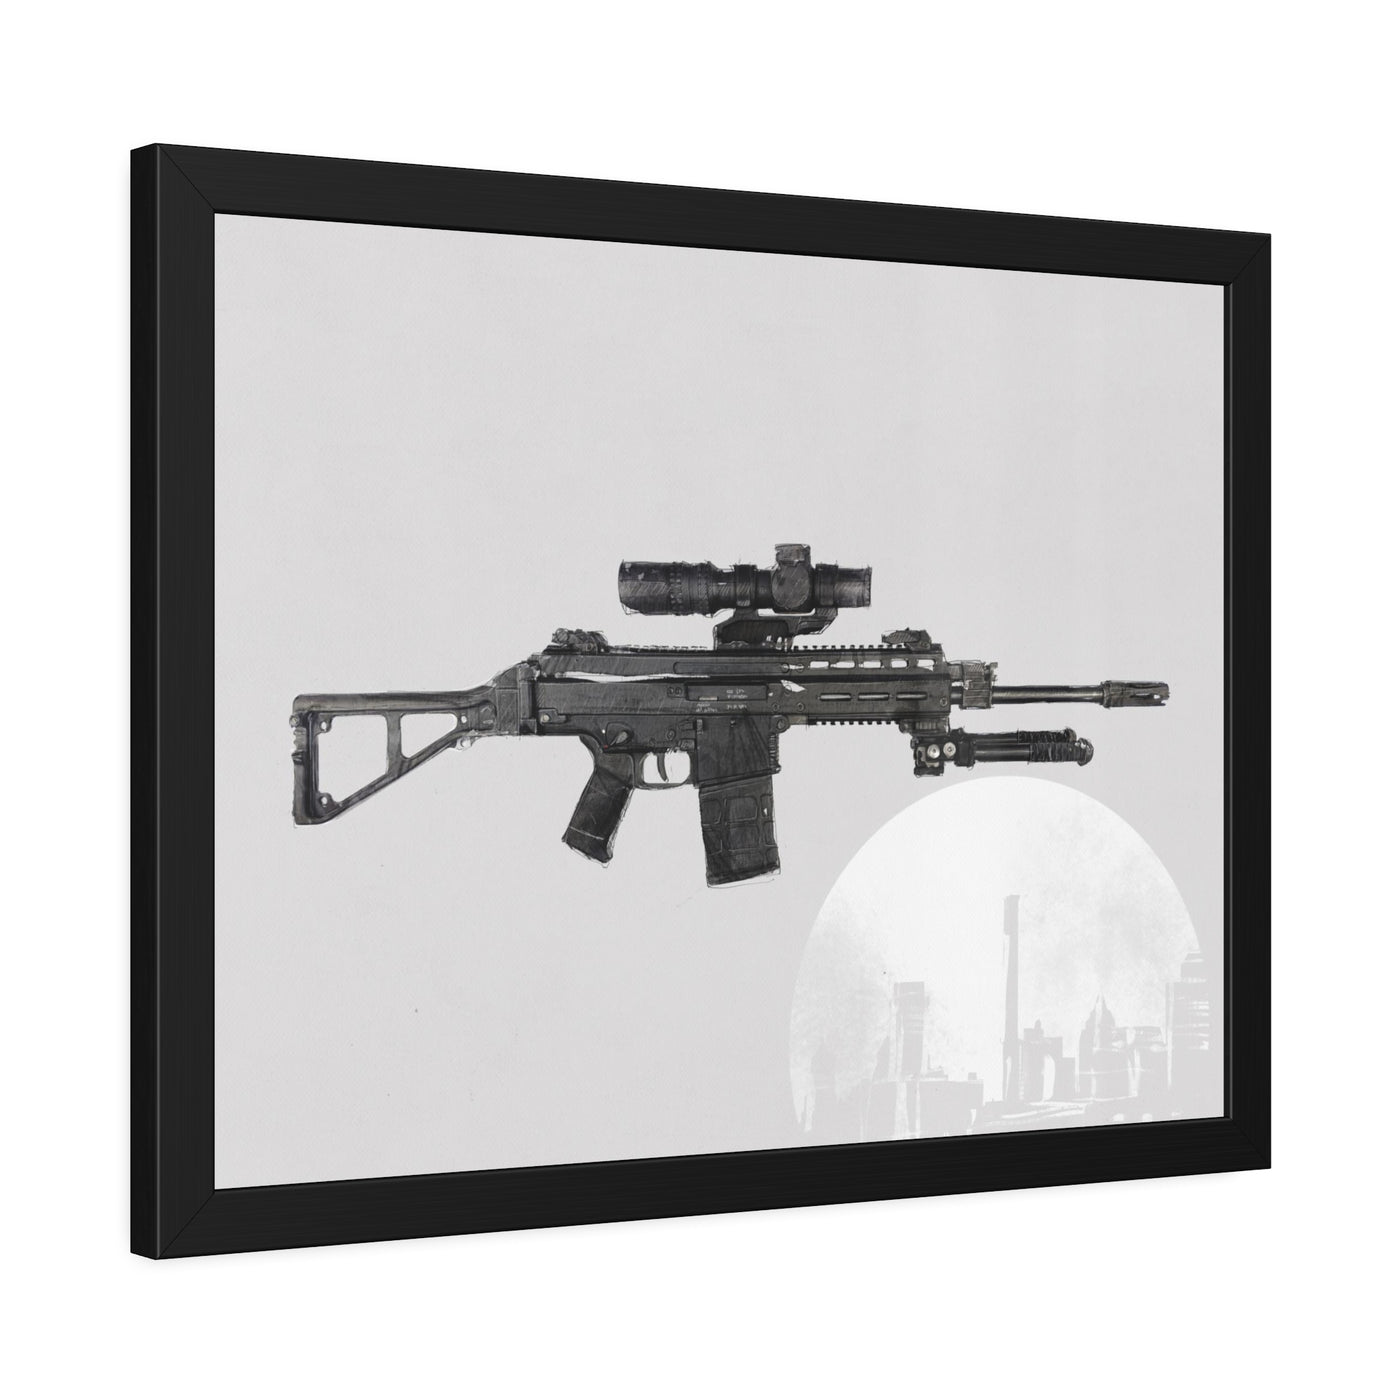 The Urban Sniper Painting - White Background - Black Frame - Value Collection